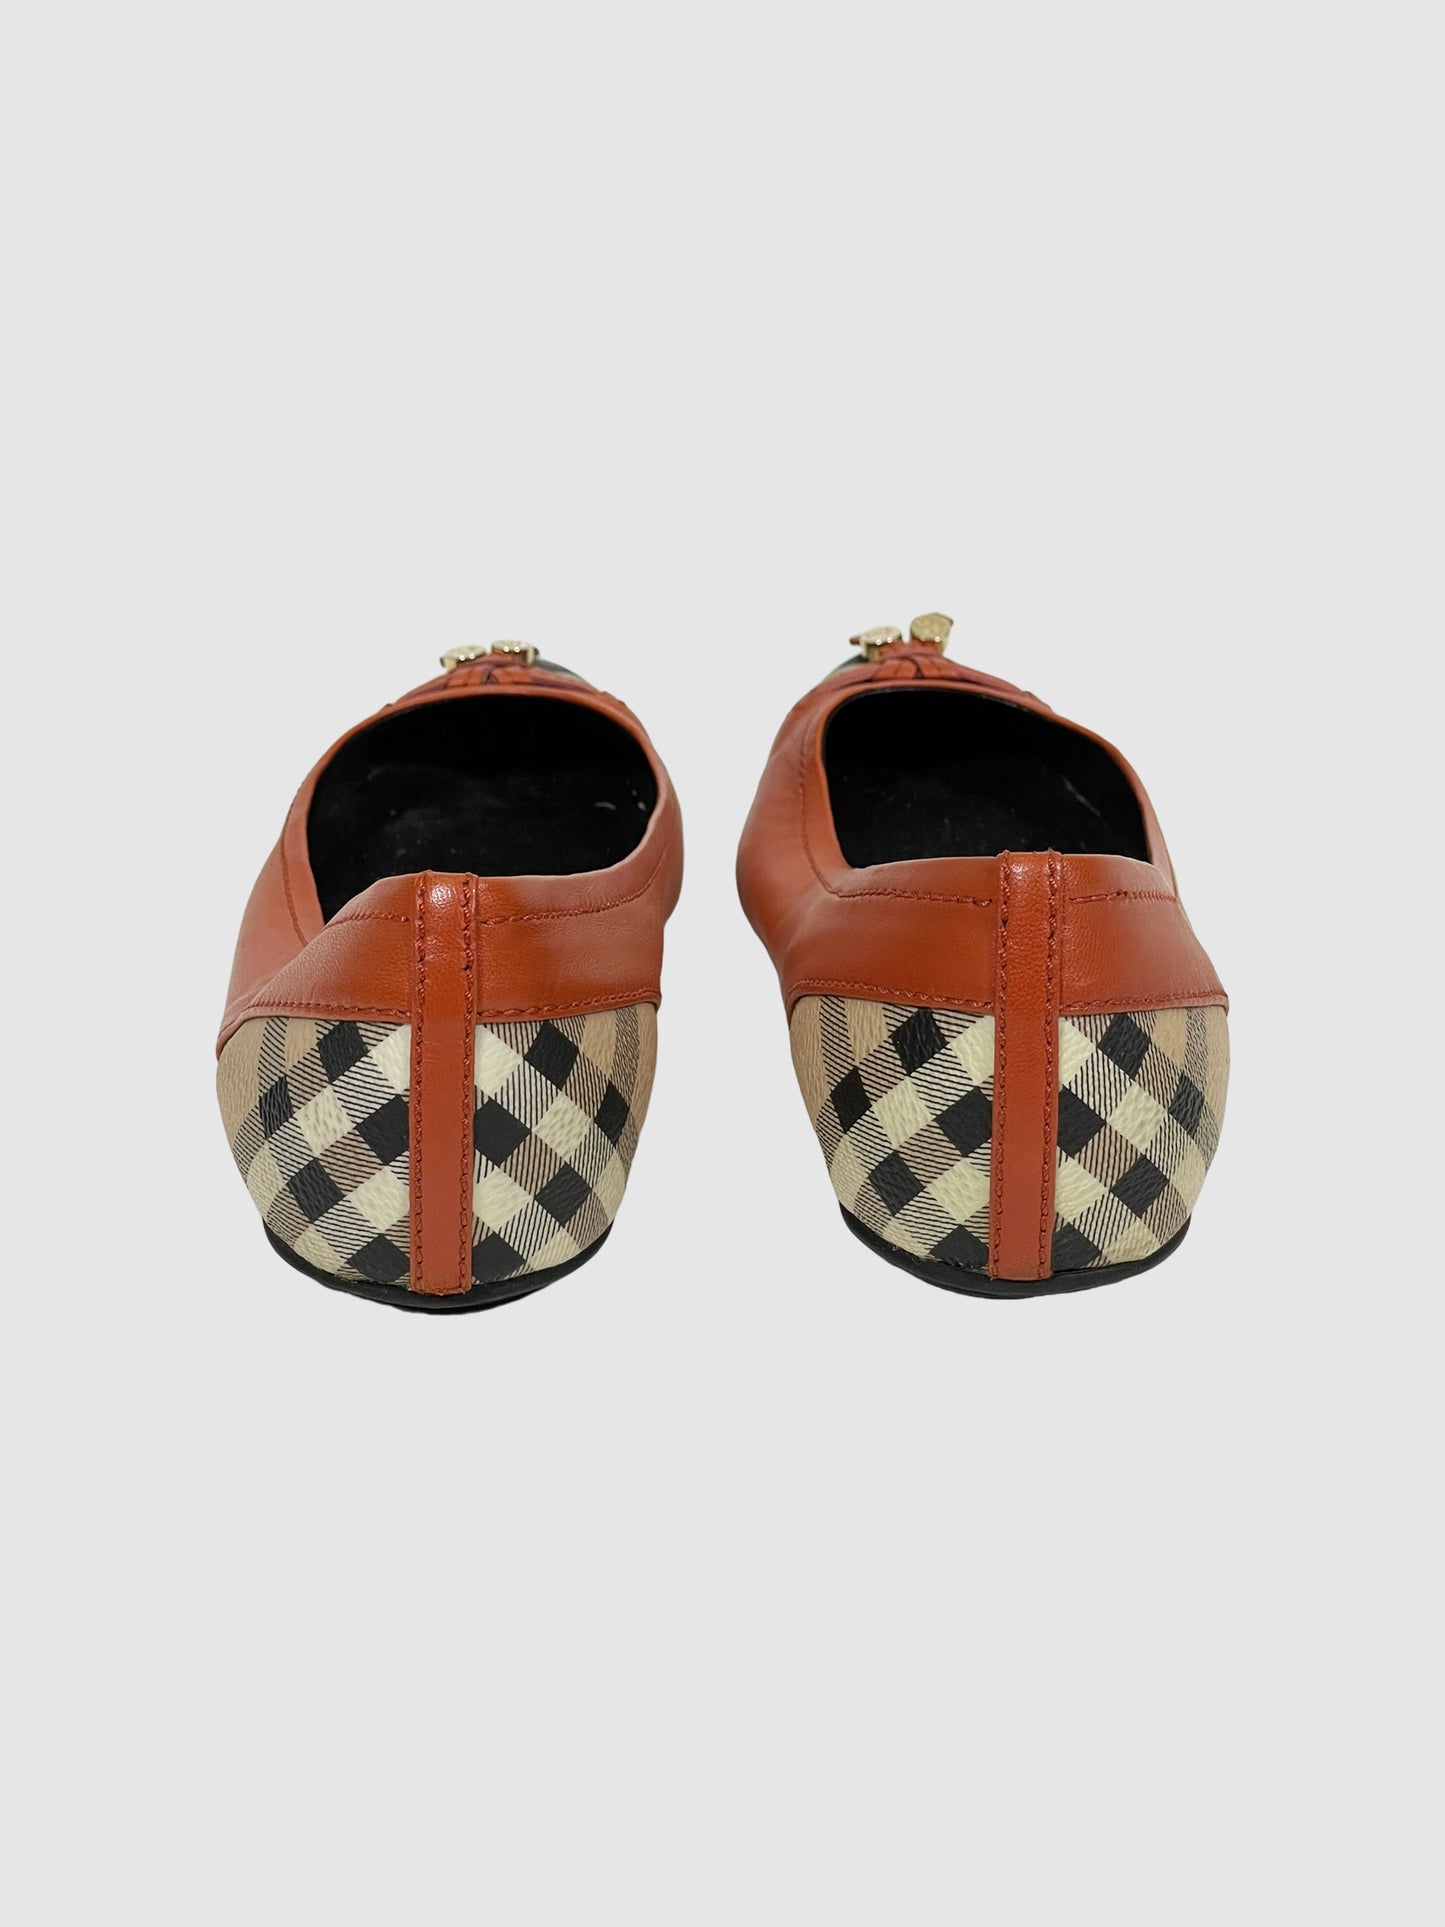 Burberry Leather Flats - Size 39